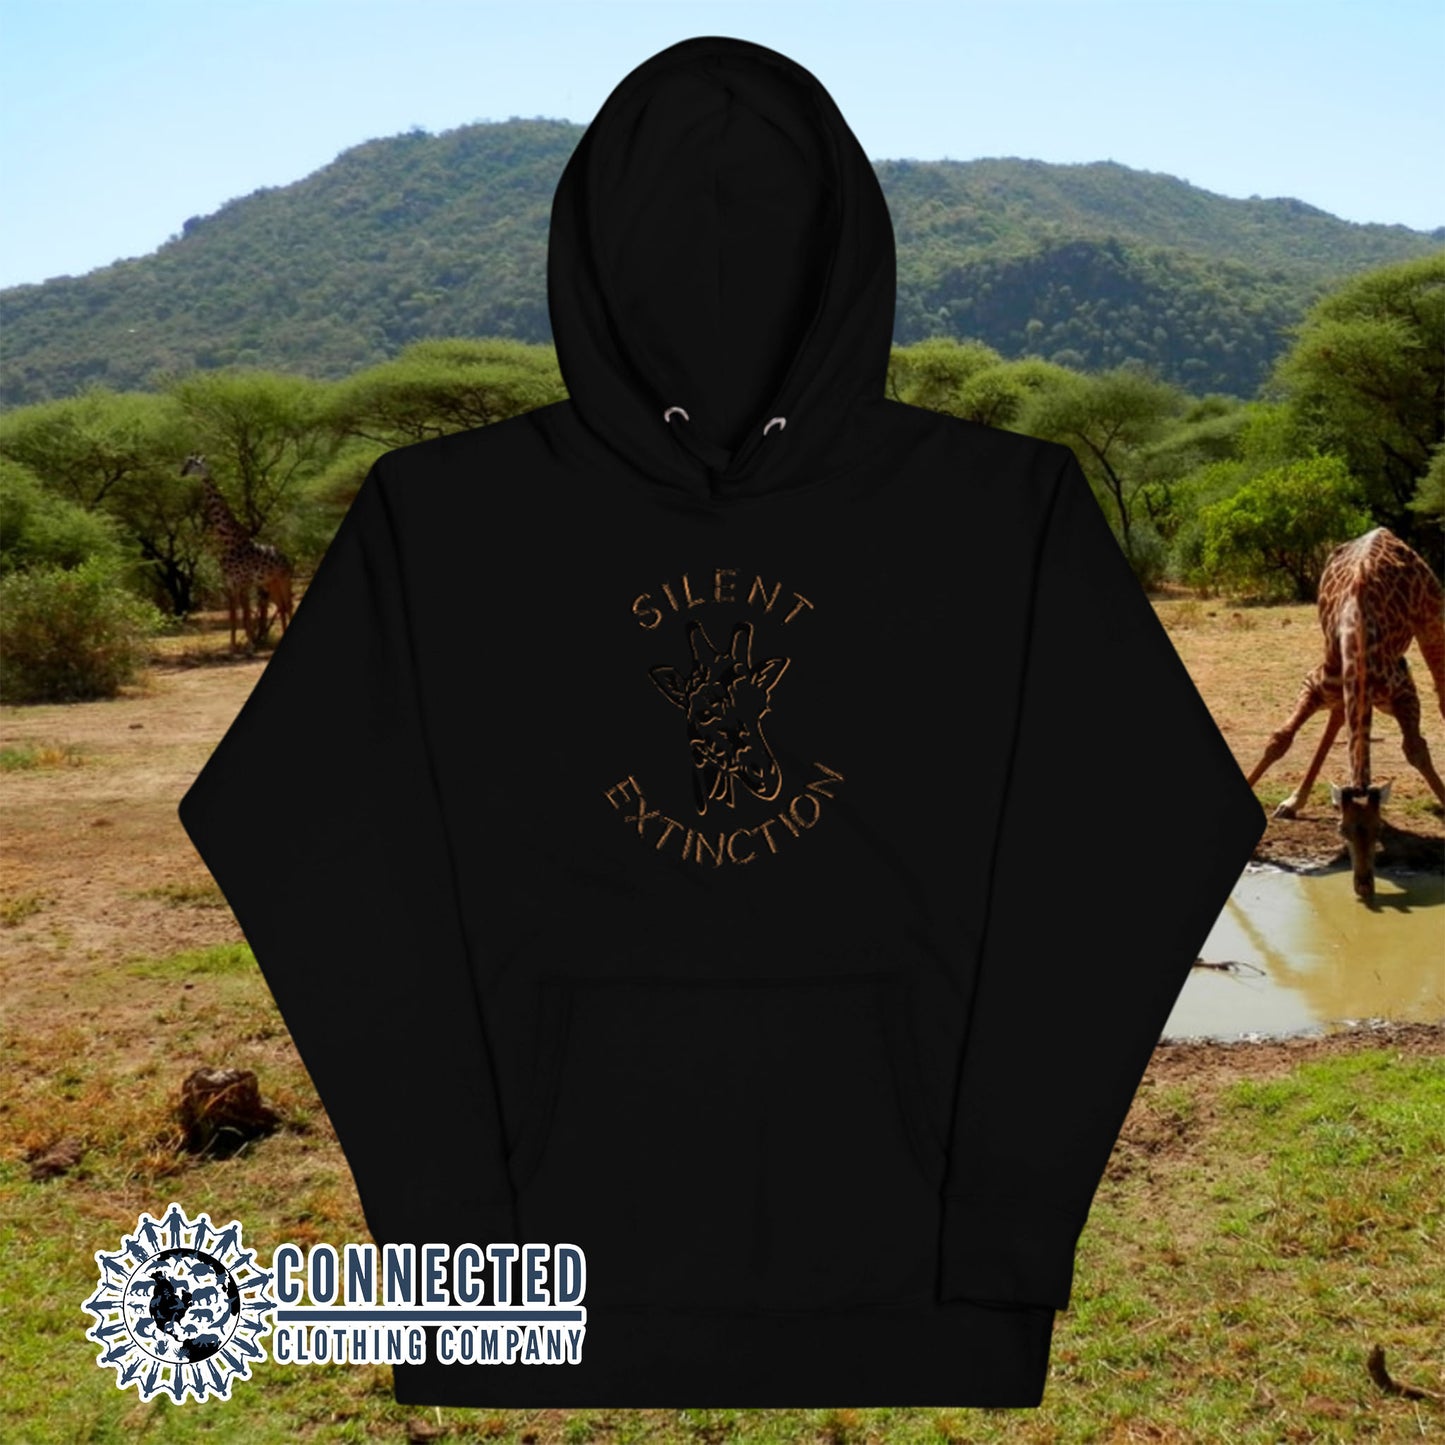 Black Giraffe Silent Extinction Unisex Hoodie - Connected Clothing Company - 10% of profits donated to the Giraffe Conservation Foundation